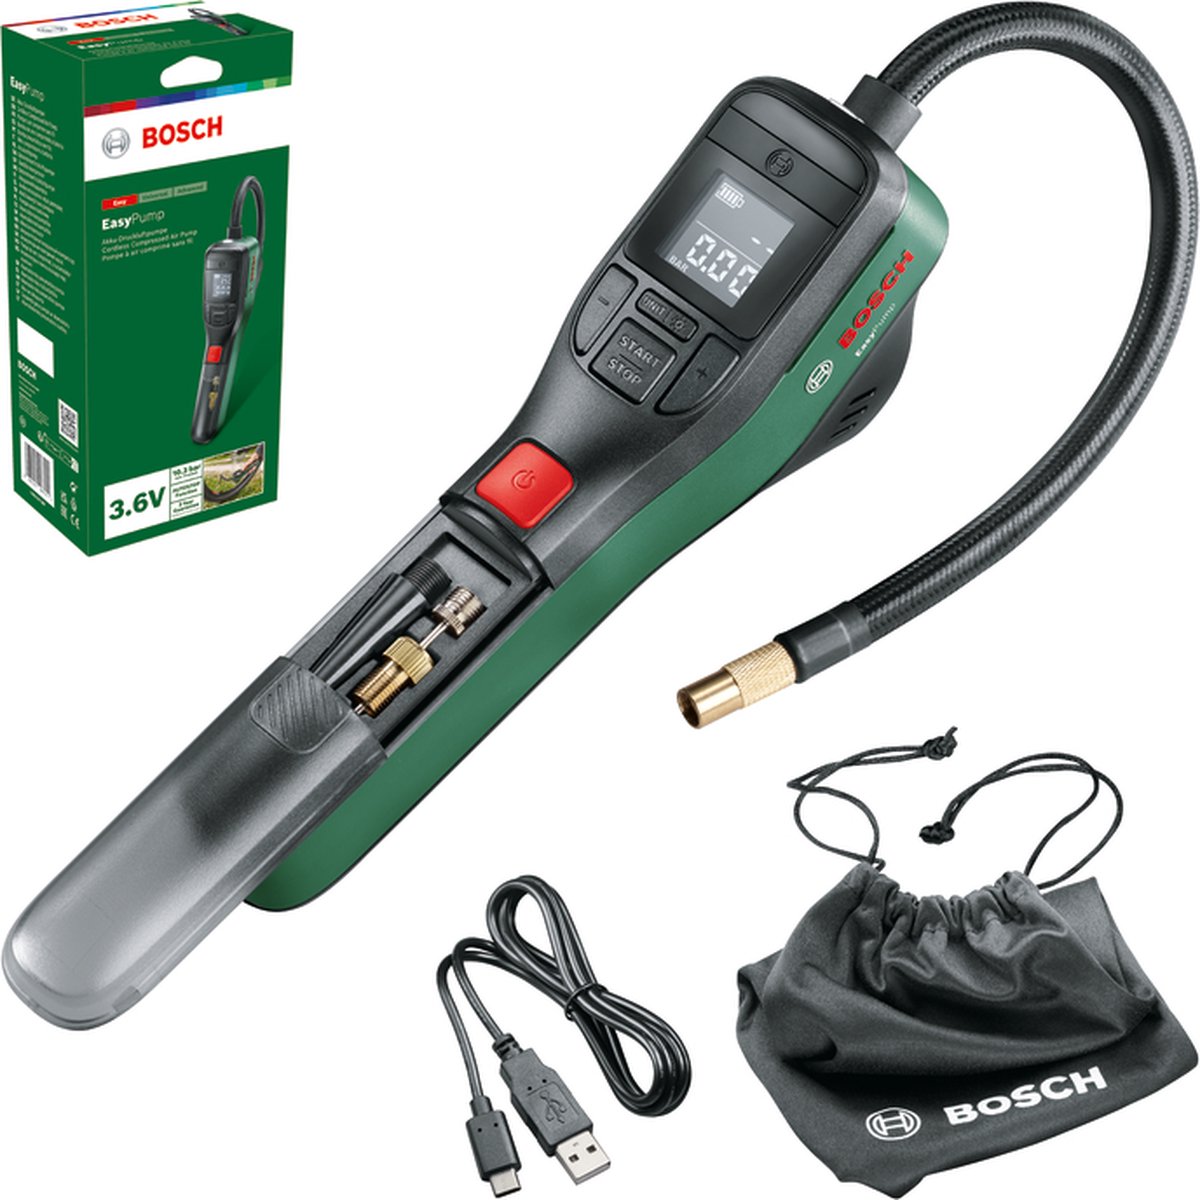 Bosch EasyPump Accupomp Review